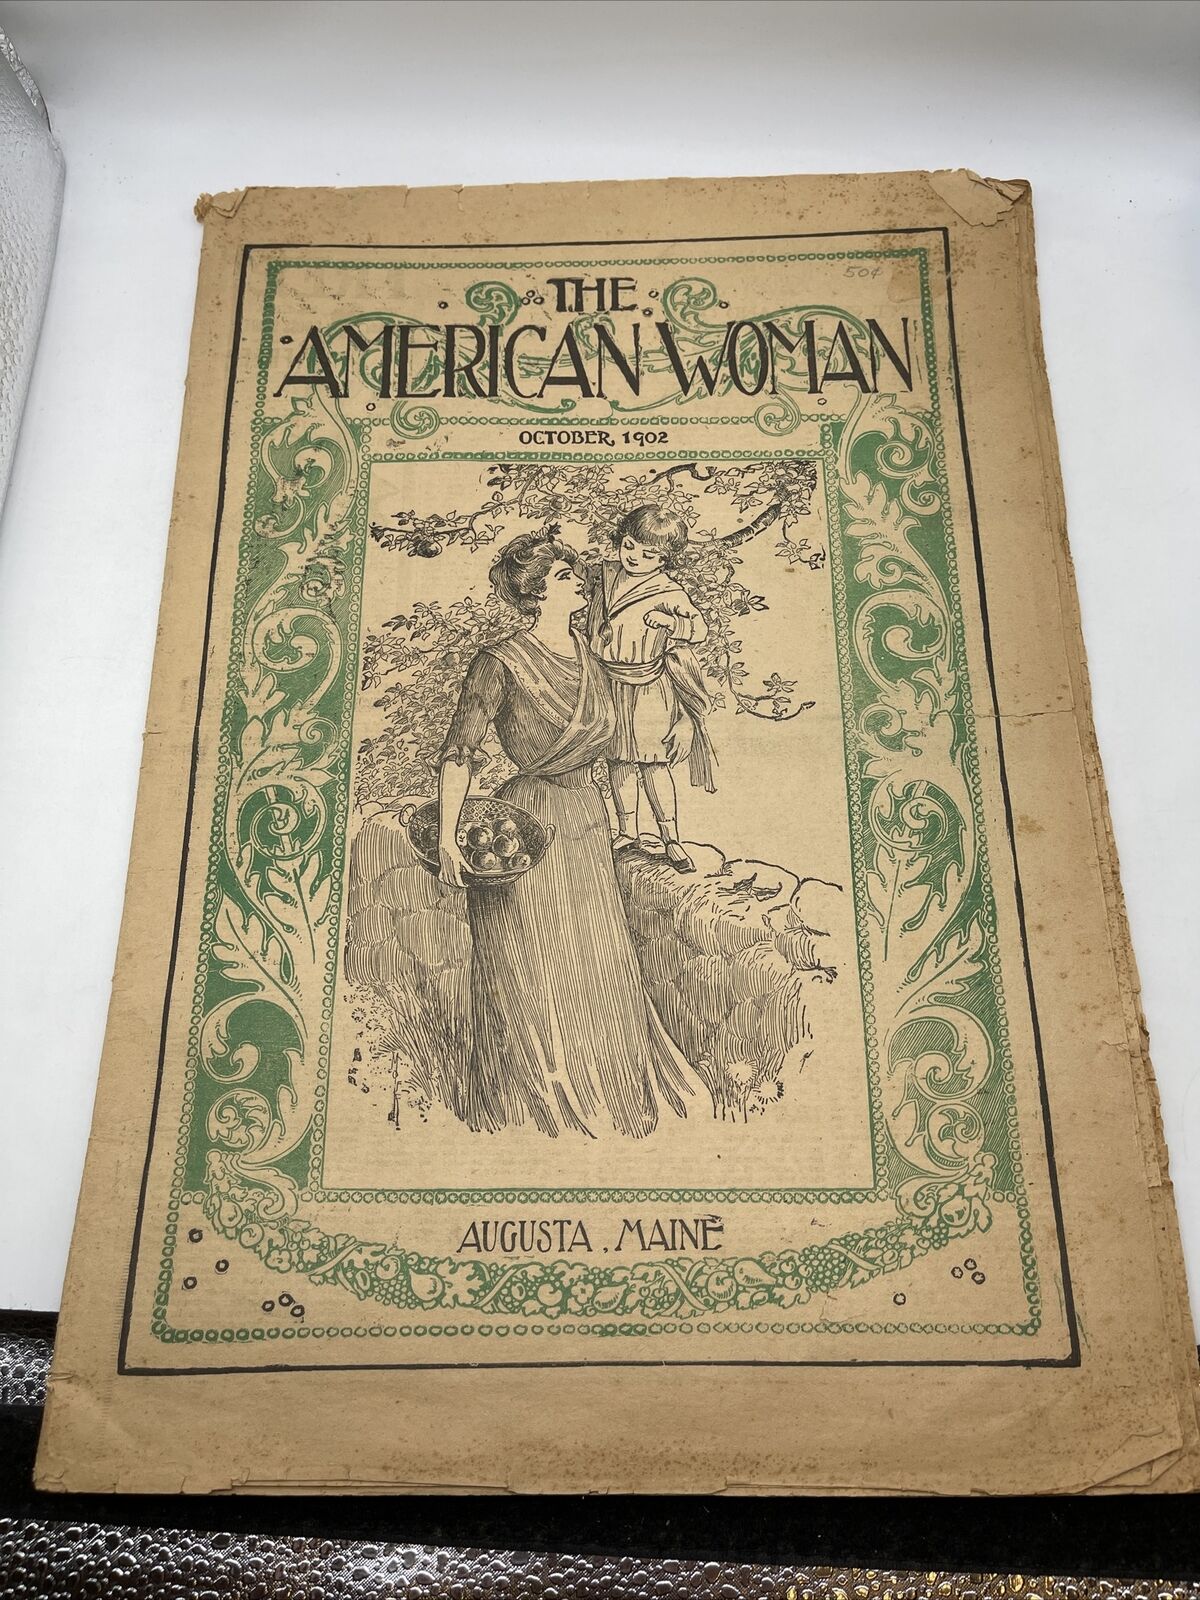 The American Woman October 1902 ~ Augusta, Maine